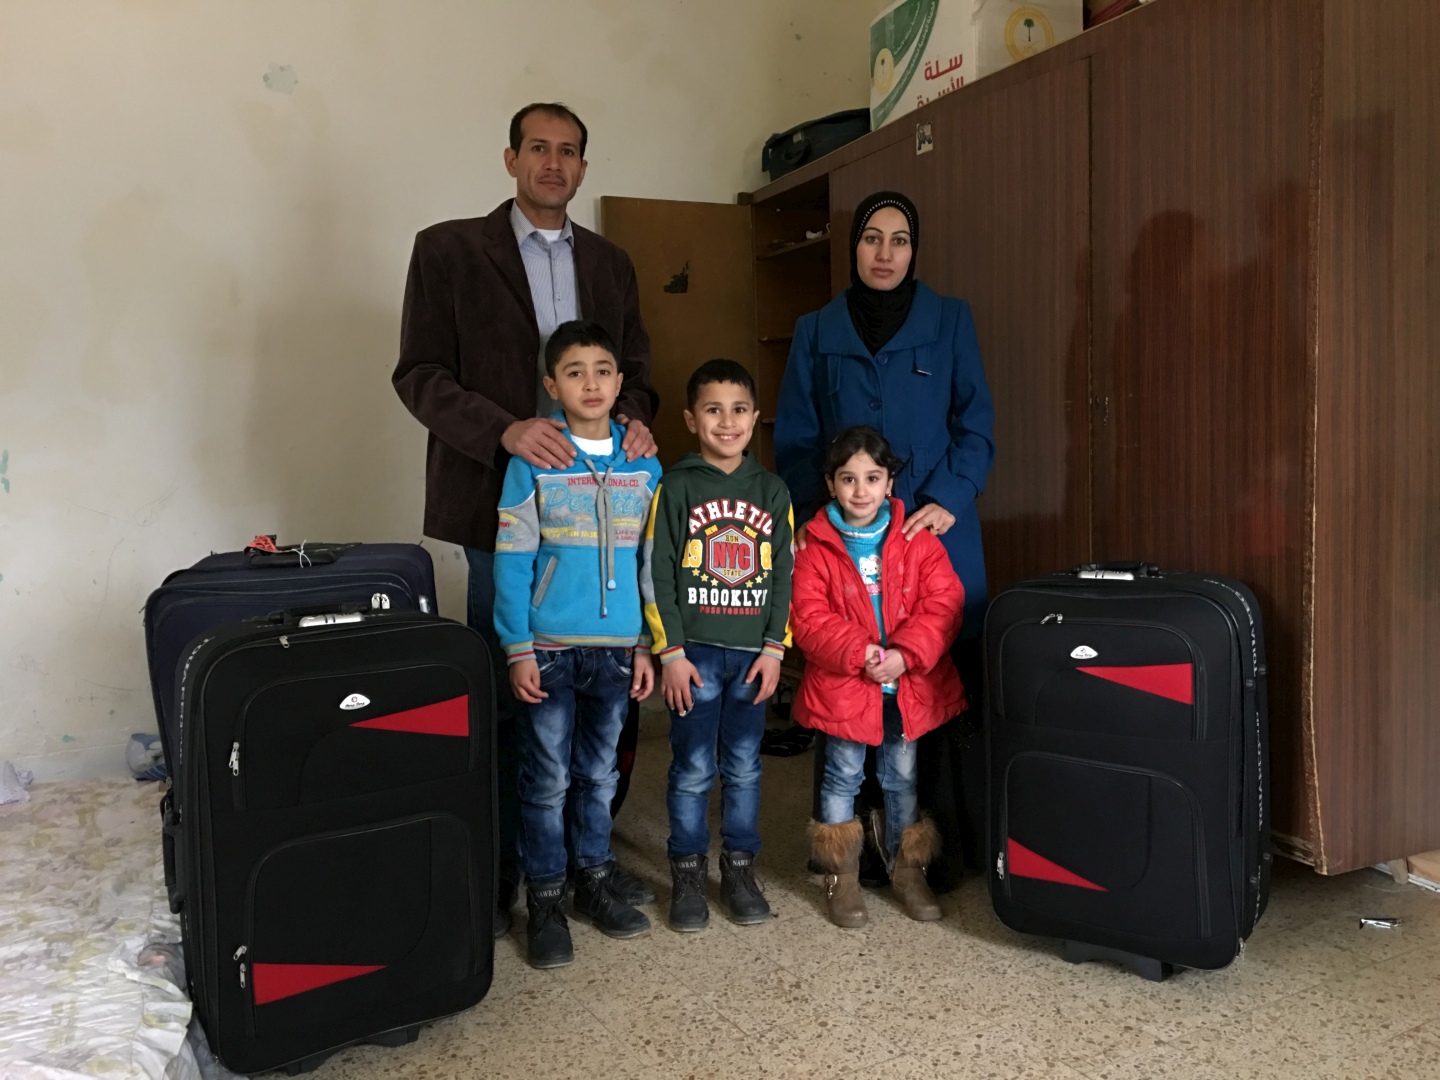 A Syrian family’s dream of a new life restored